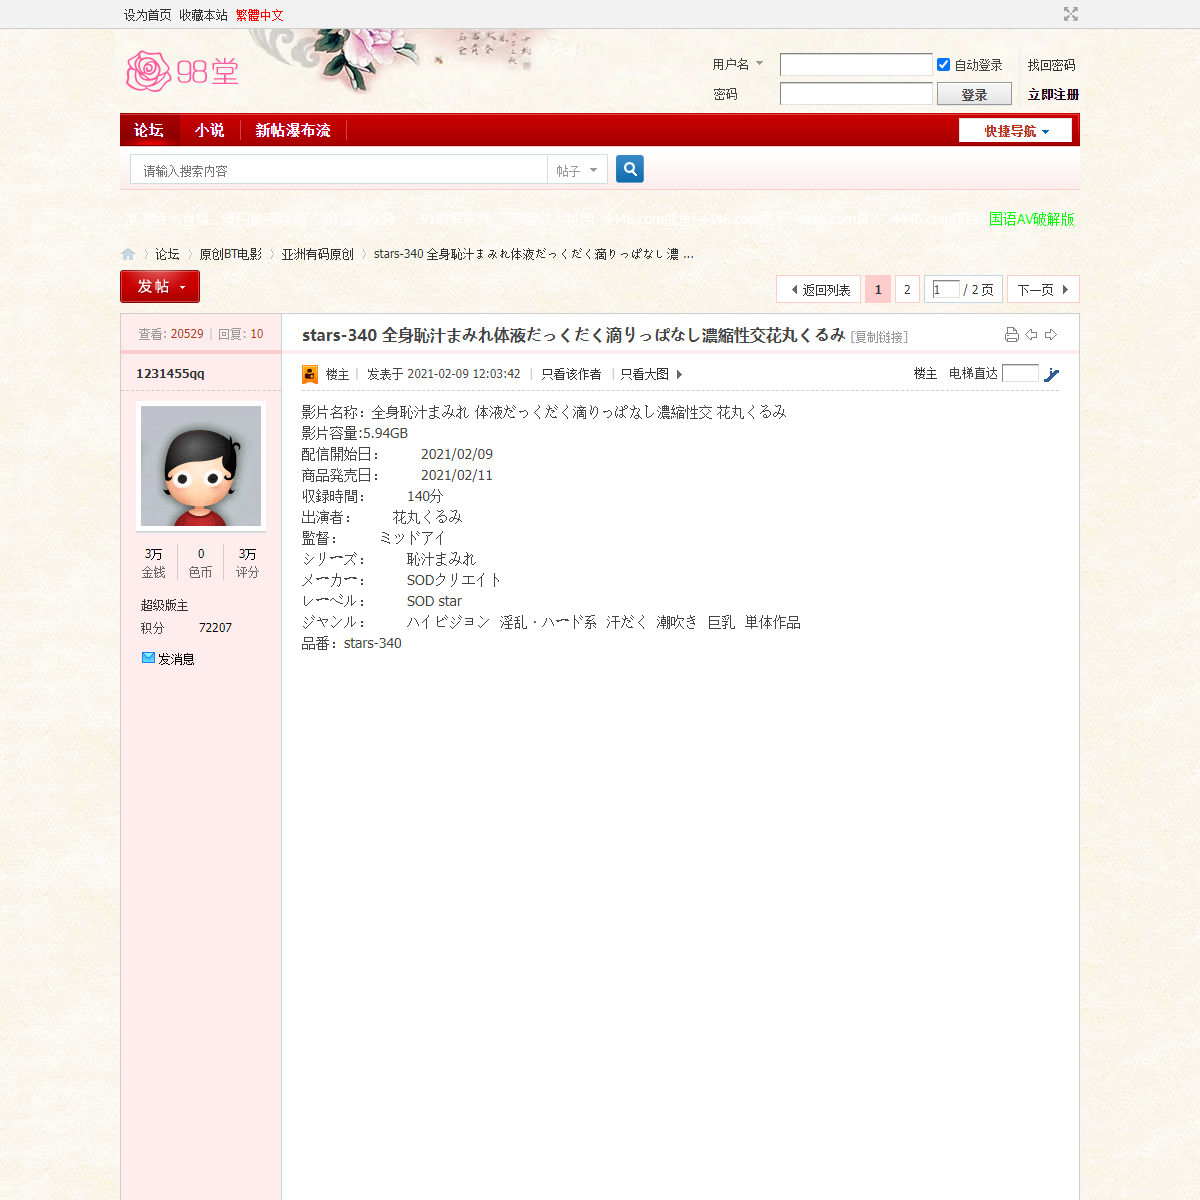 A complete backup of https://www.sehuatang.net/thread-478092-1-1.html